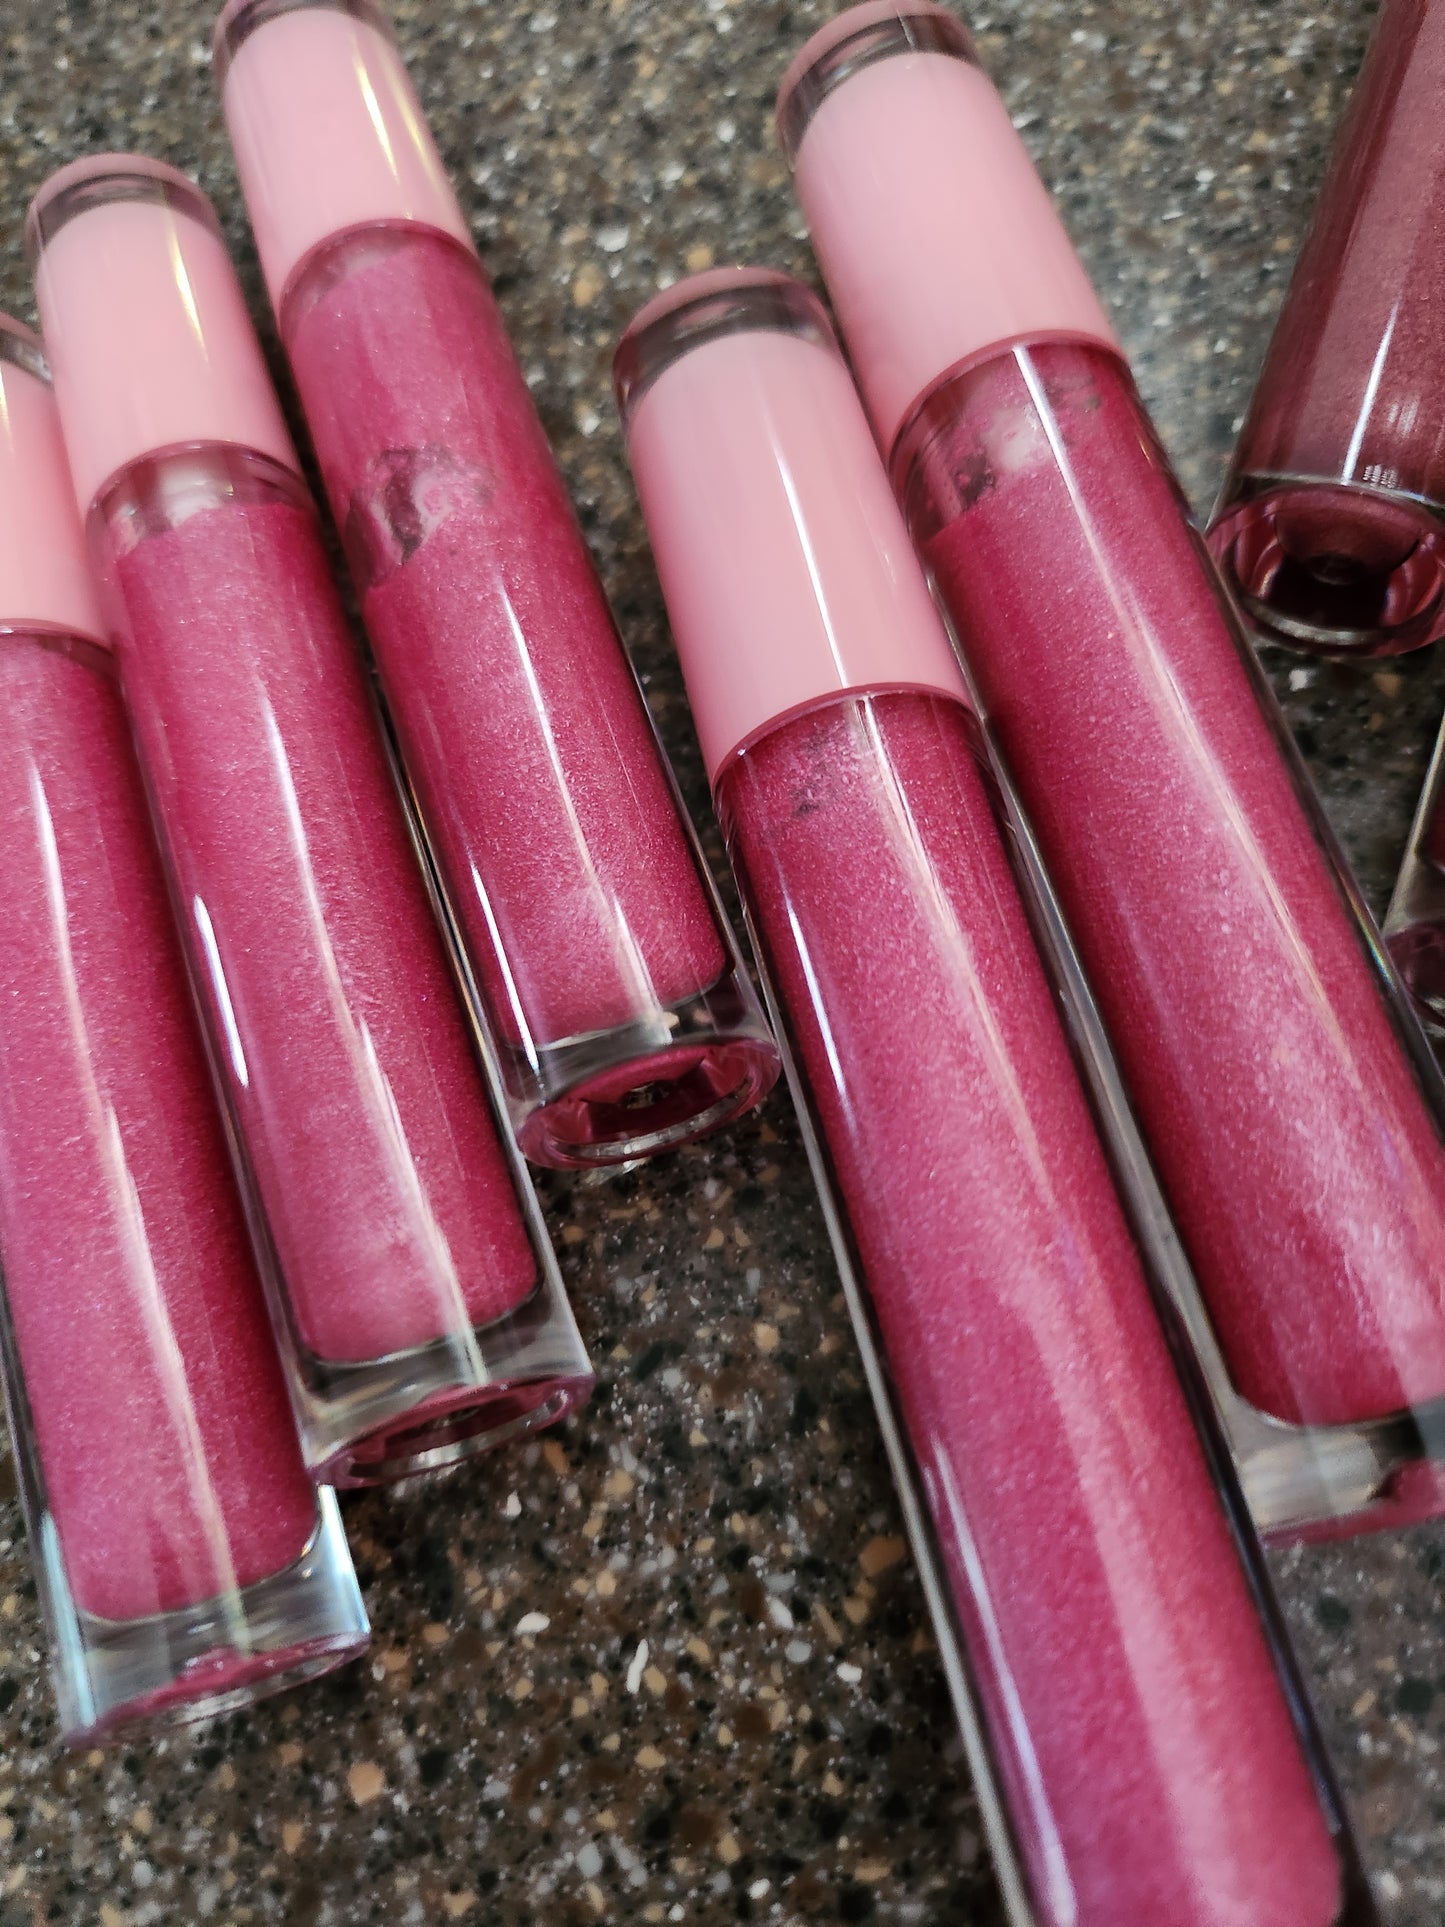 Plumping lip gloss, Hyaluronic Acid Infused